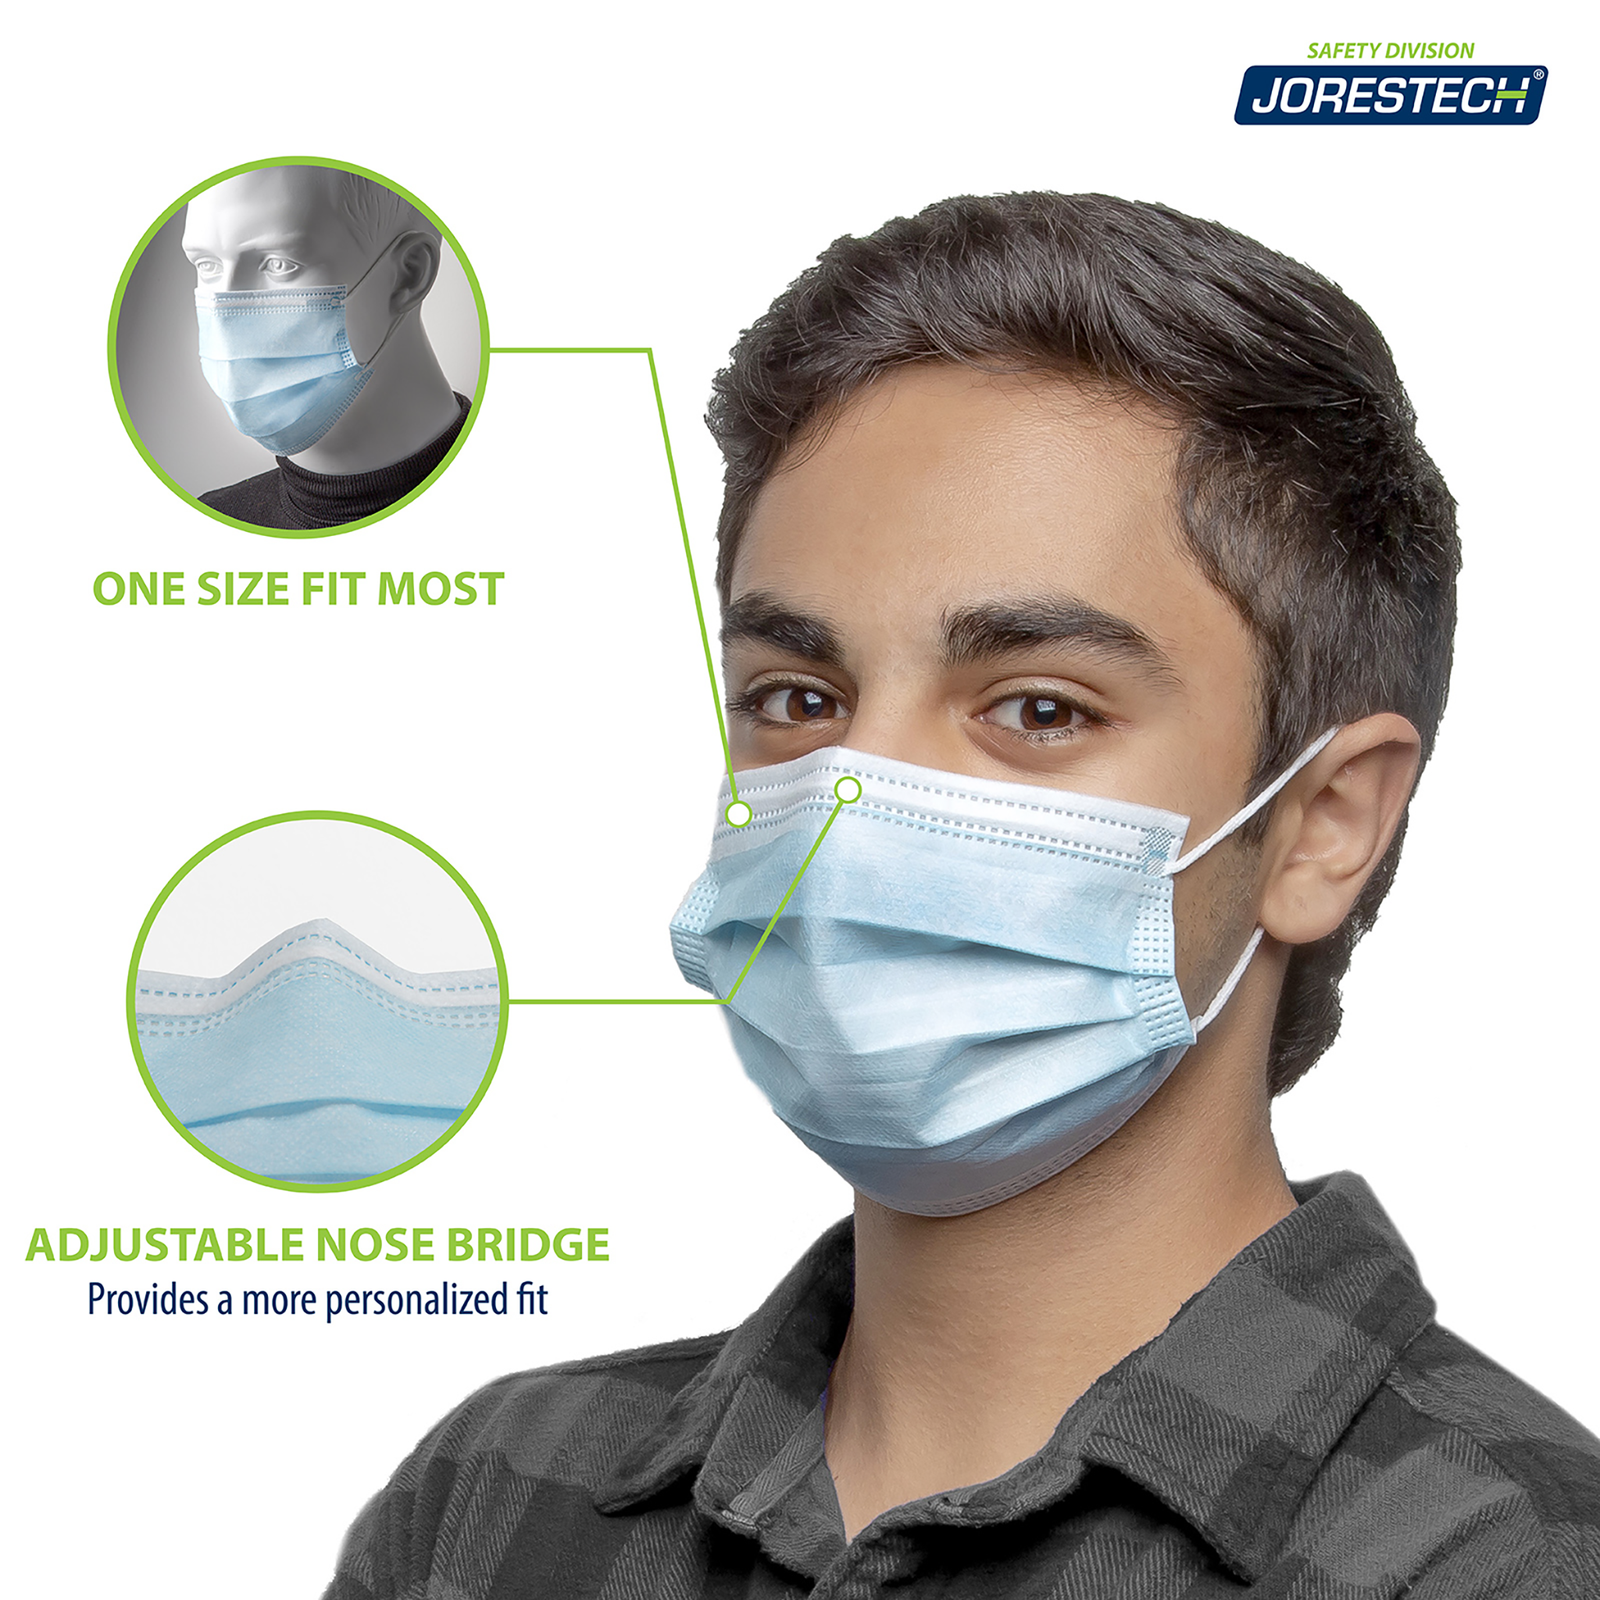 A man wearing the 3 ply safety mask and call outs read: One size fits most and adjustable nose bridge Provides a more personalized fit.